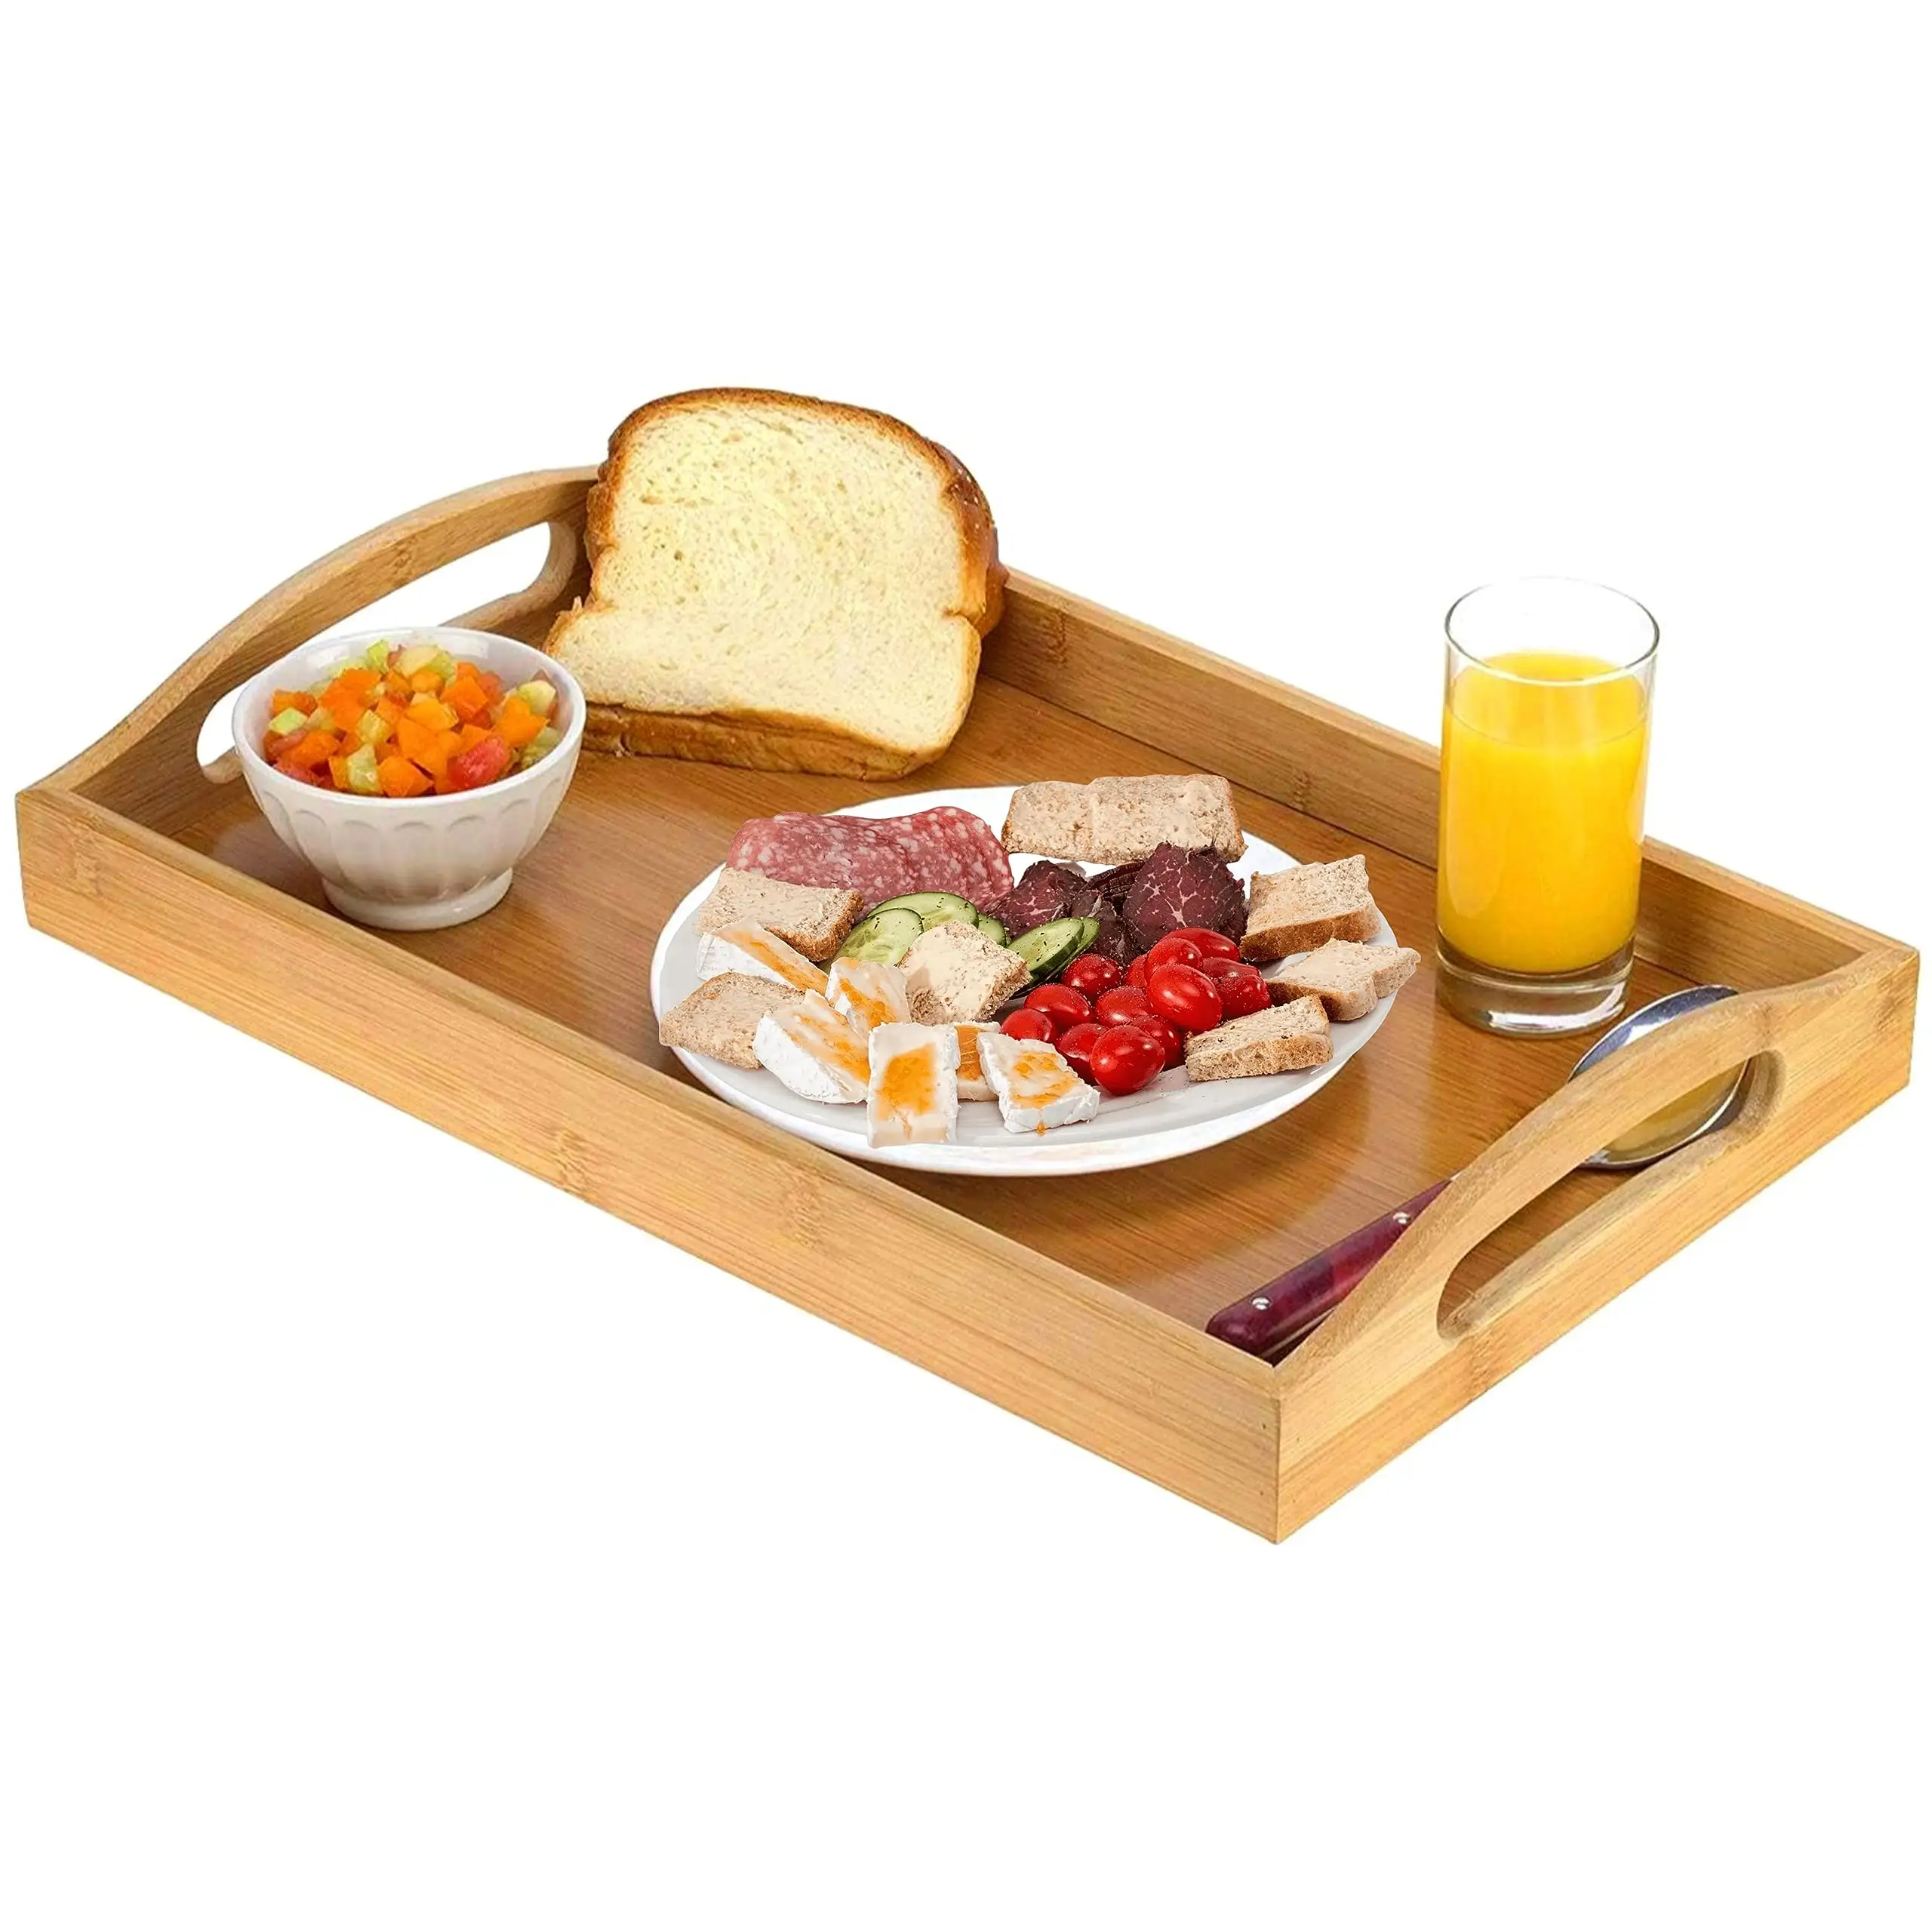 2023 Hot Sale Rustic Wooden Tray Rectangular Modern Food Holder Natural Wood Serving Tray with Handles